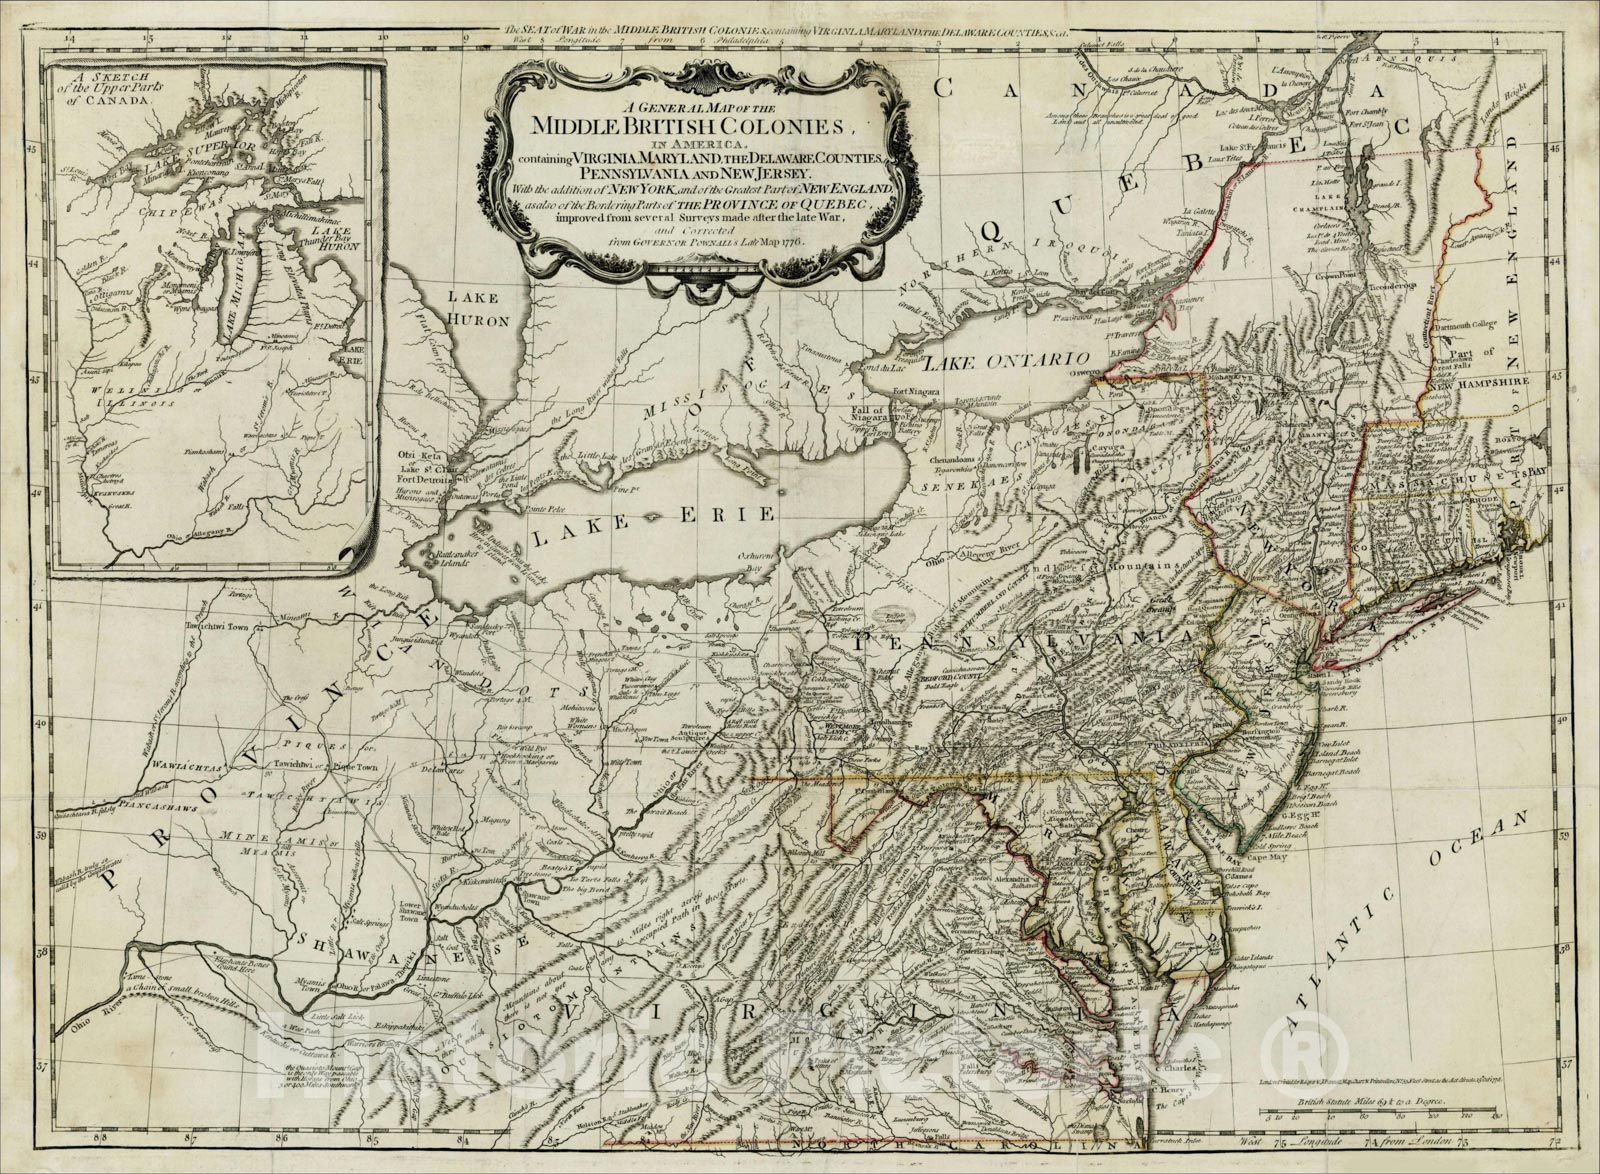 Historic Map : The Seat of War in the Middle British Colonies containing Virginia, Maryland, 1755, Lewis Evans, Vintage Wall Art